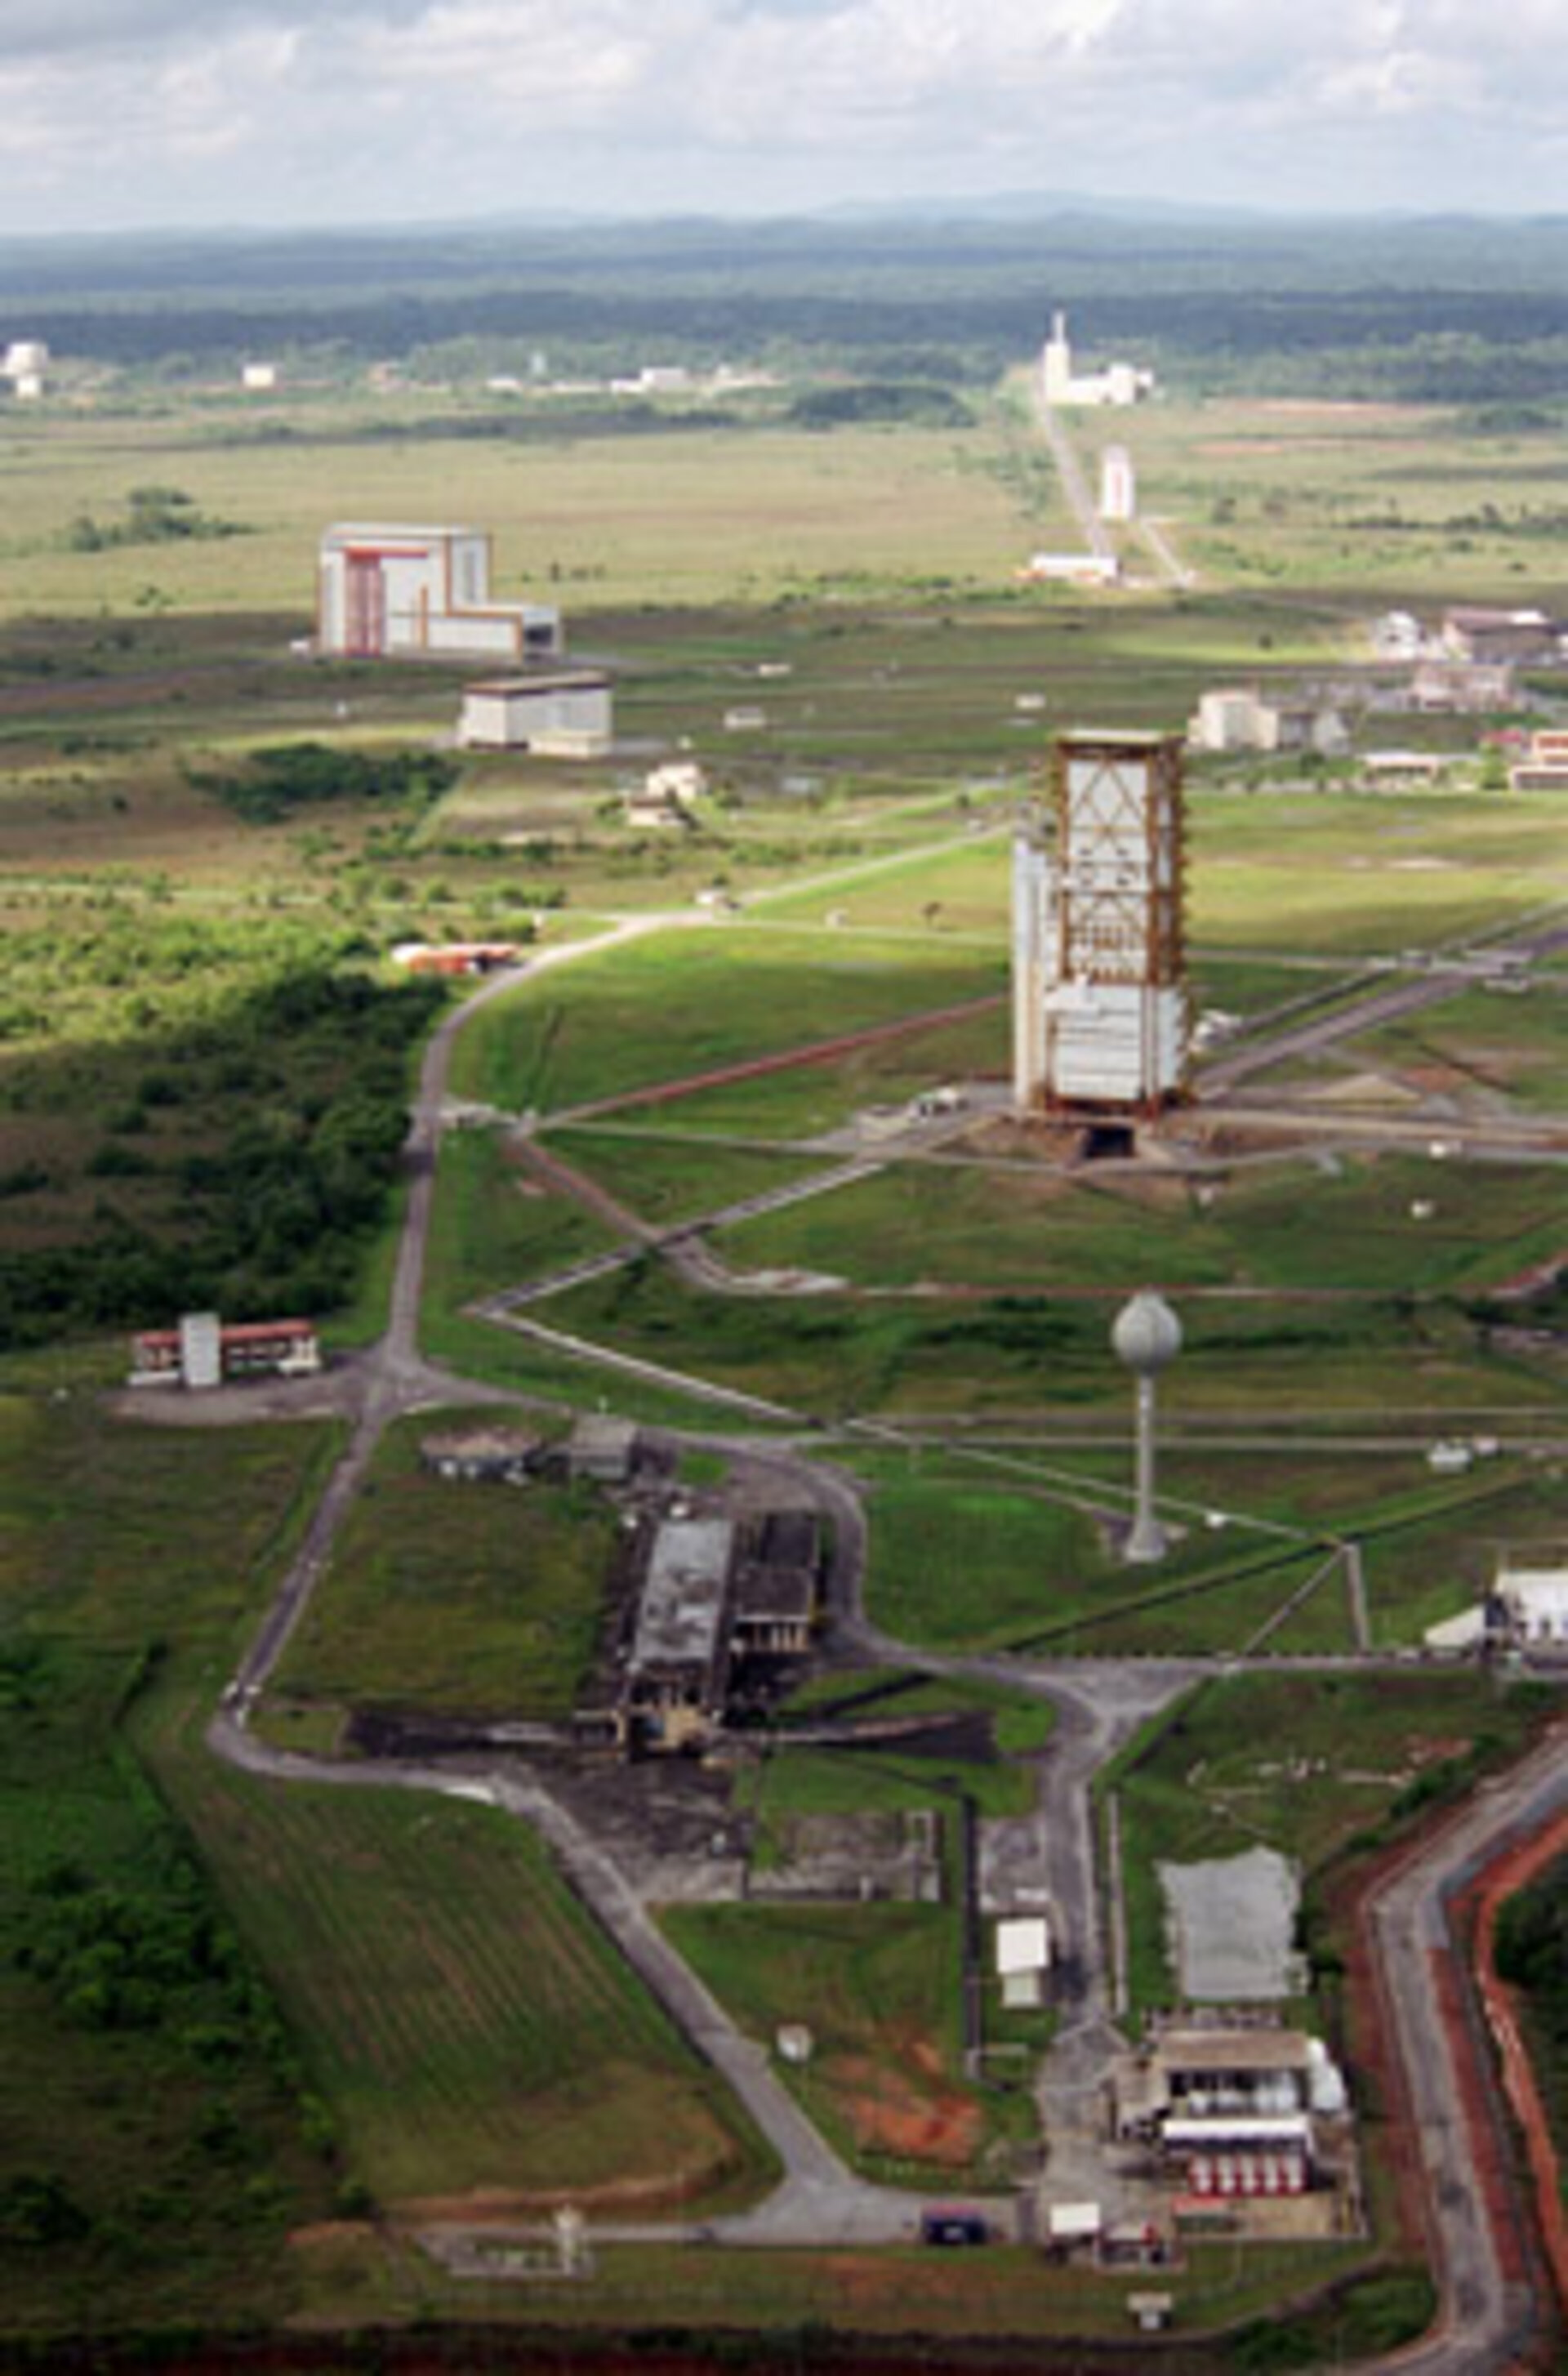 ELA 1 launch zone at Europe's spaceport in French Guyana